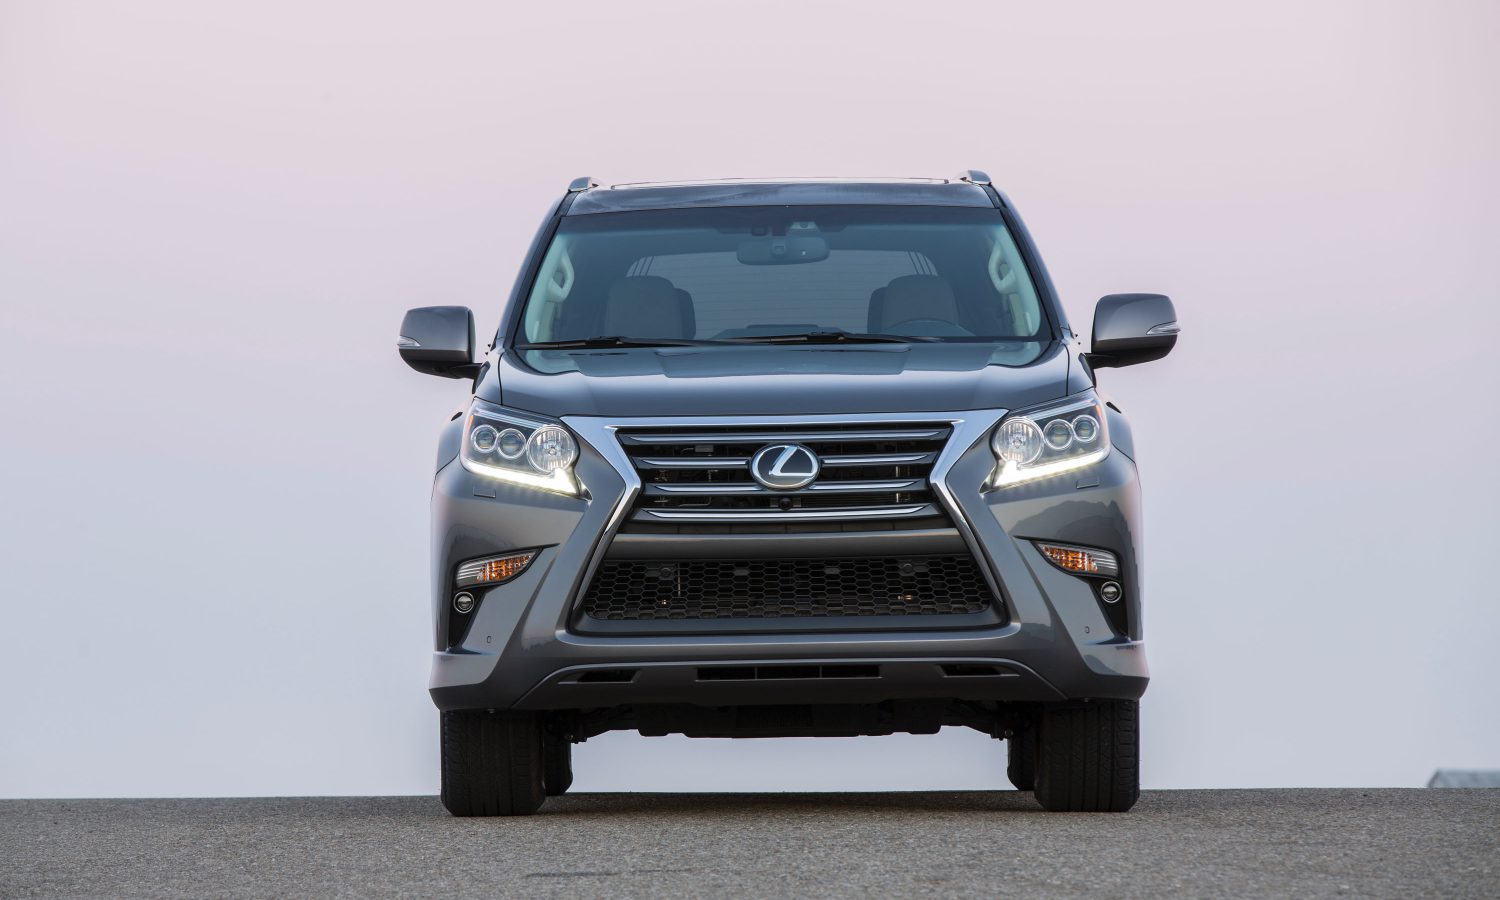 2015 Lexus GX 460 Works for the Week but Lives for the Weekends - Lexus USA  Newsroom